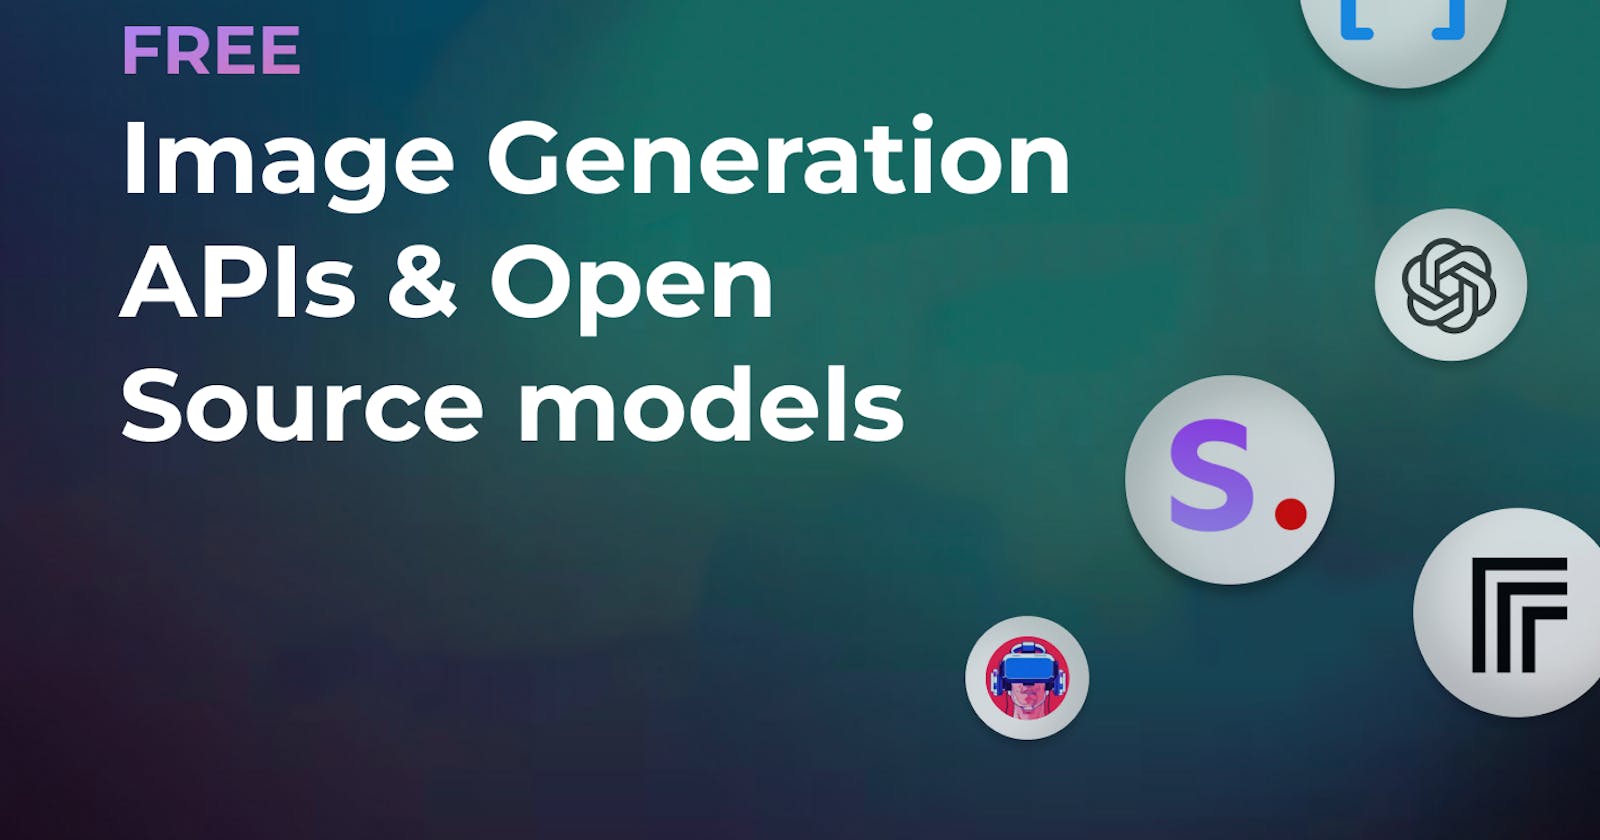 Top Free Image Generation tools, APIs, and Open Source models